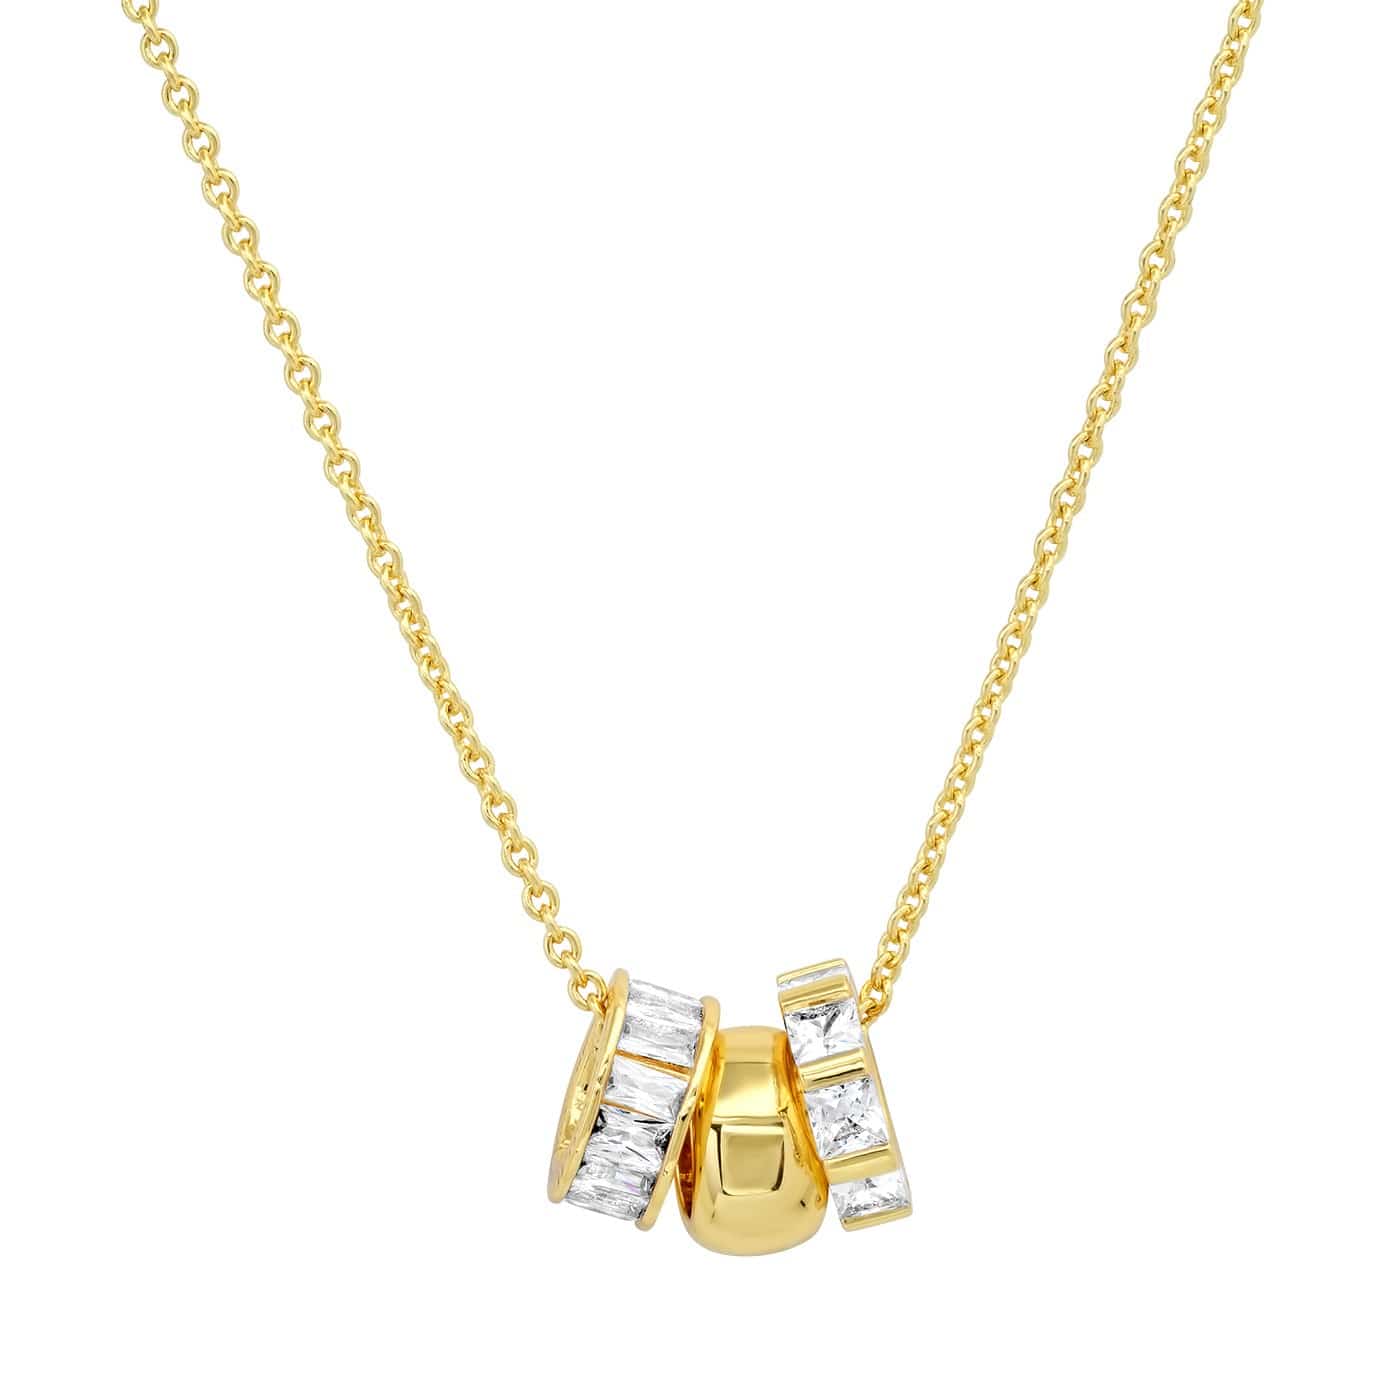 NKL-GPL Necklace With CZ Rondelle Charms